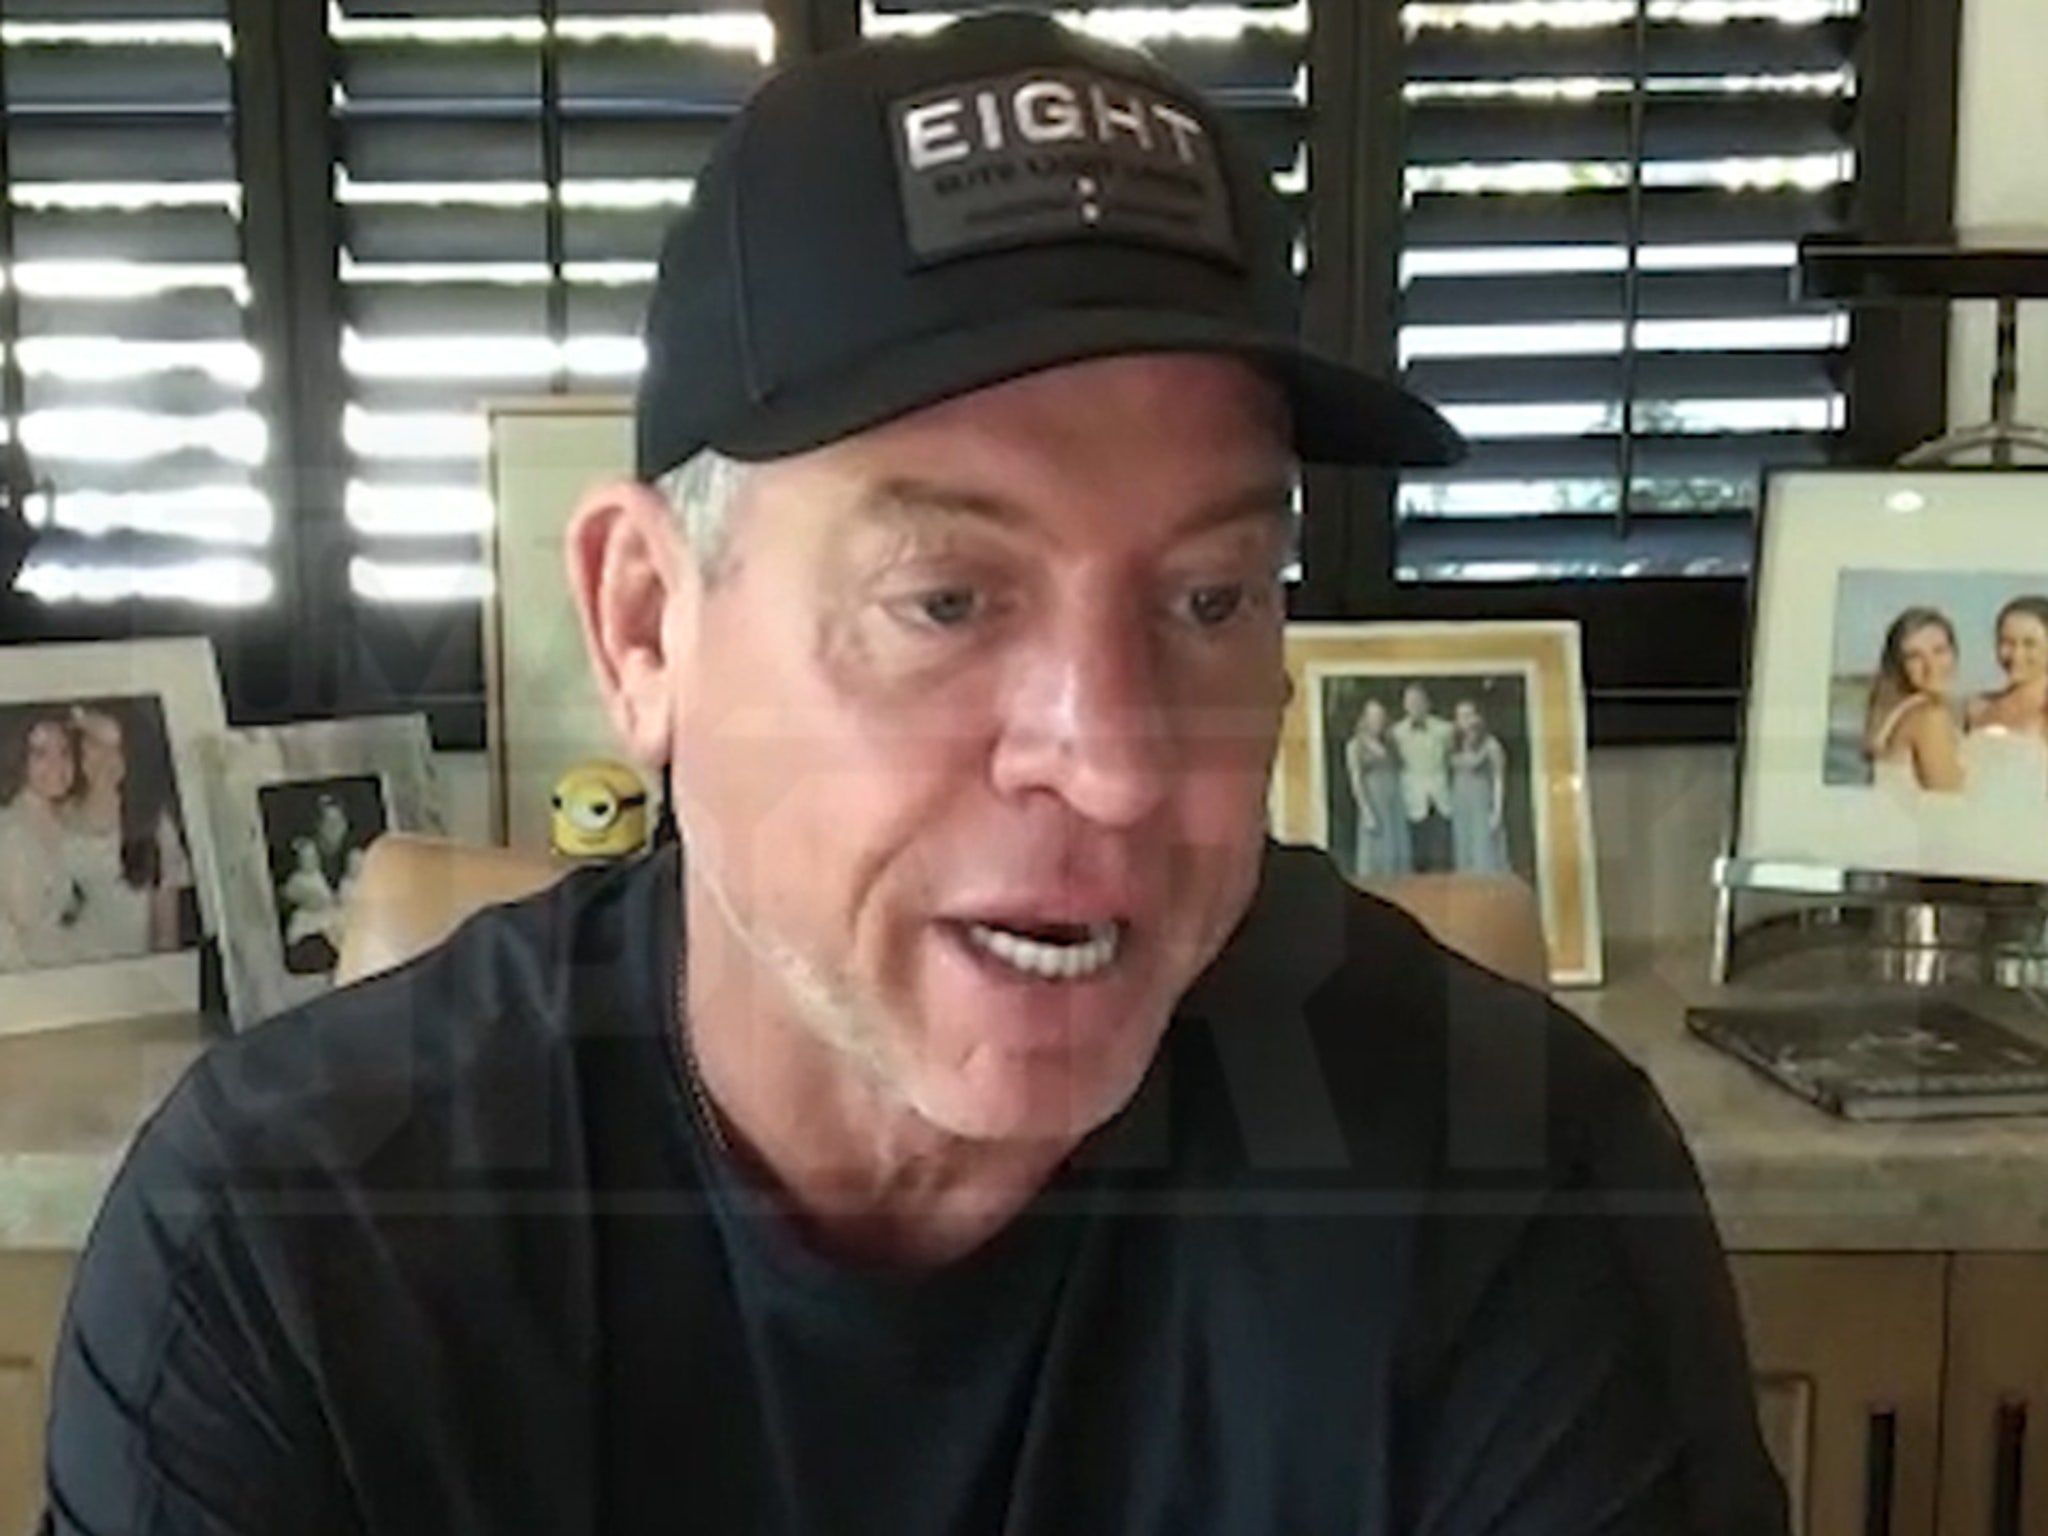 Cowboys Hall of Famer Troy Aikman revisits rumors he's eyeing a